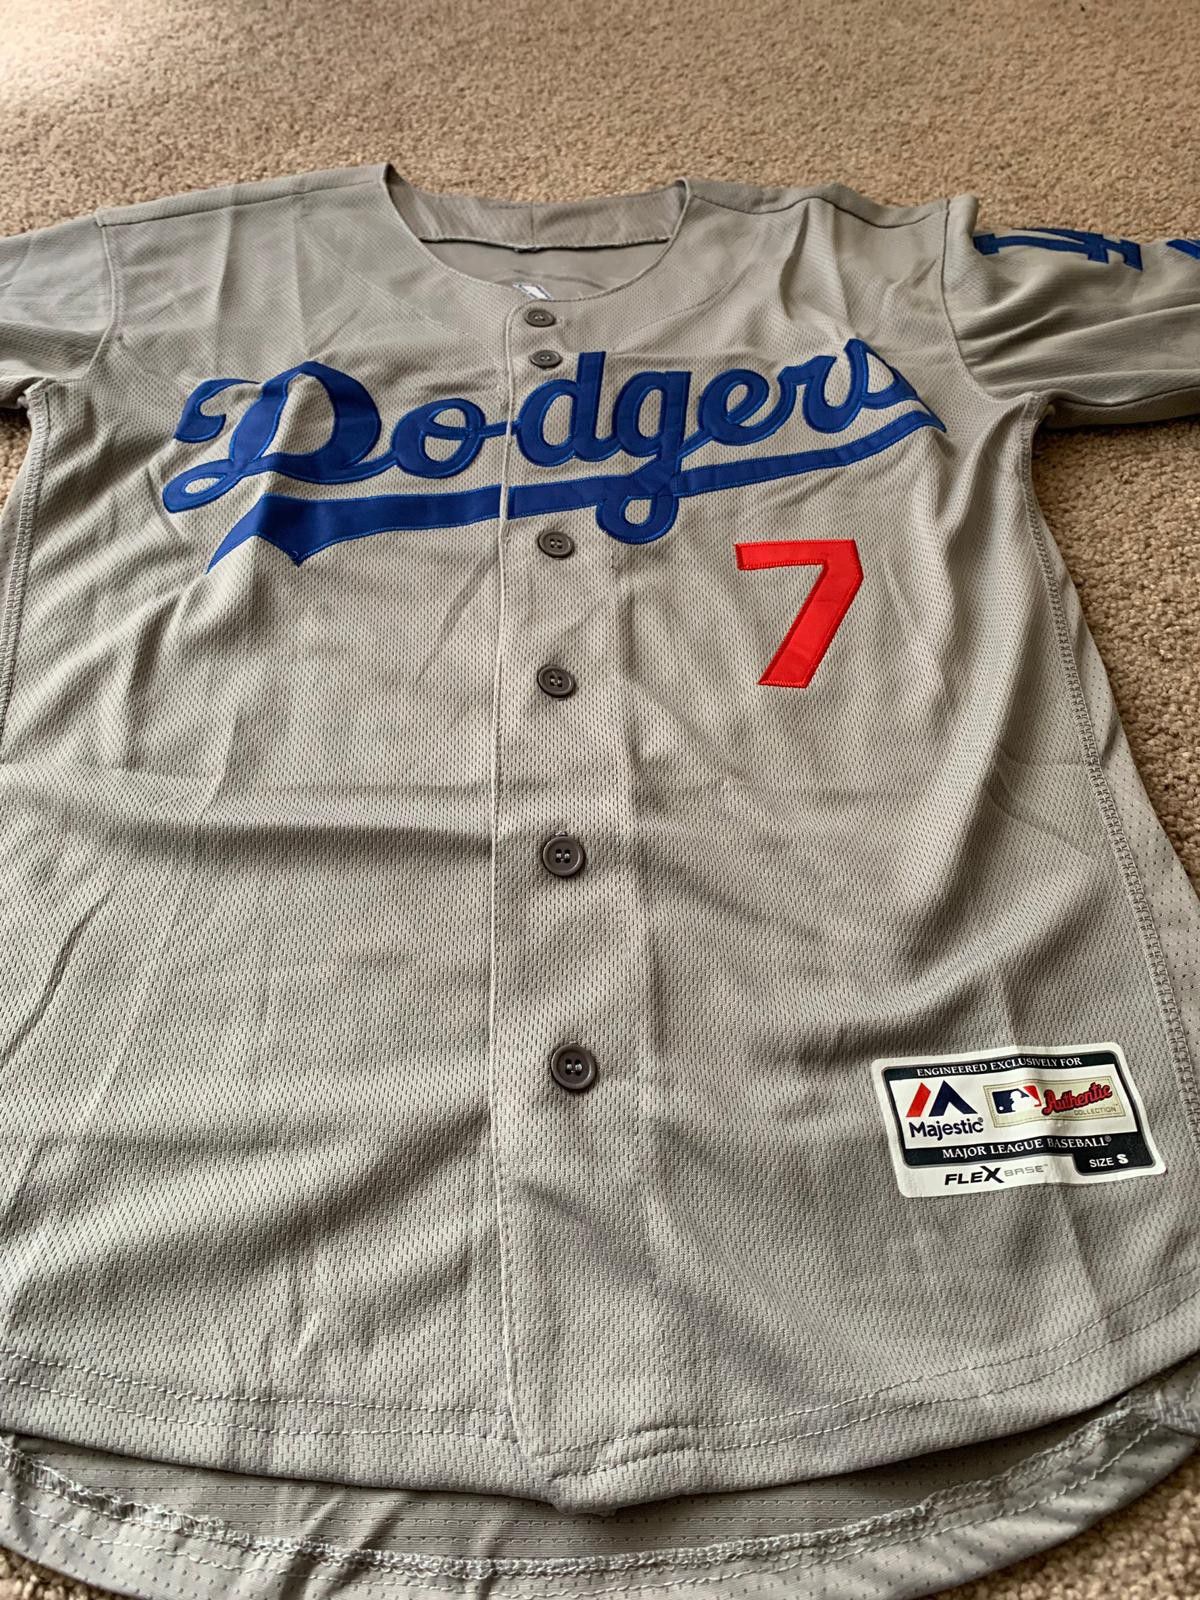 Dodgers Julio Urias Jersey M L XL for Sale in Los Angeles, CA - OfferUp